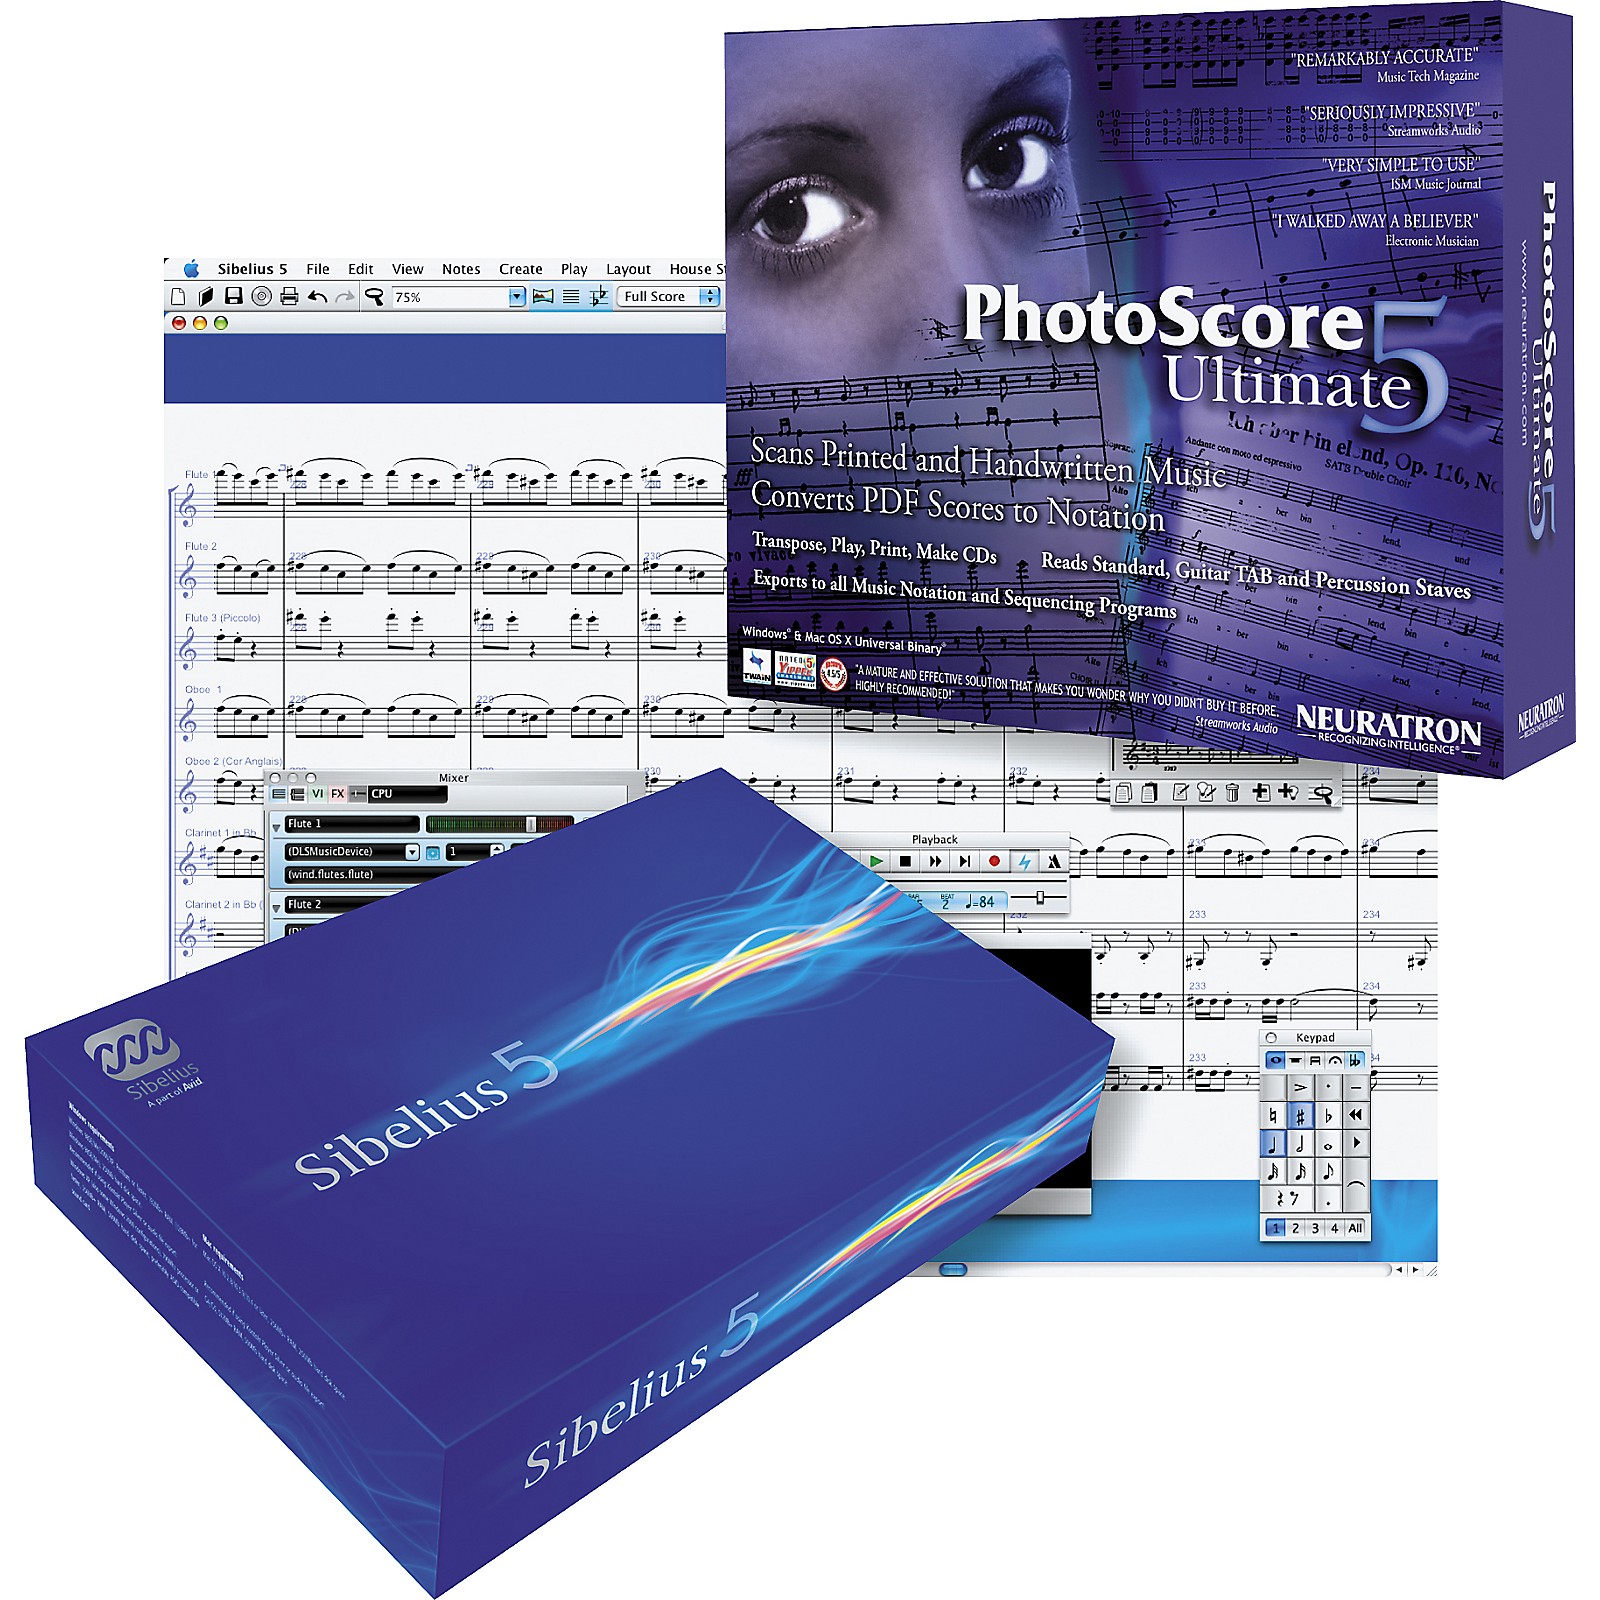 photoscore ultimate 7 download